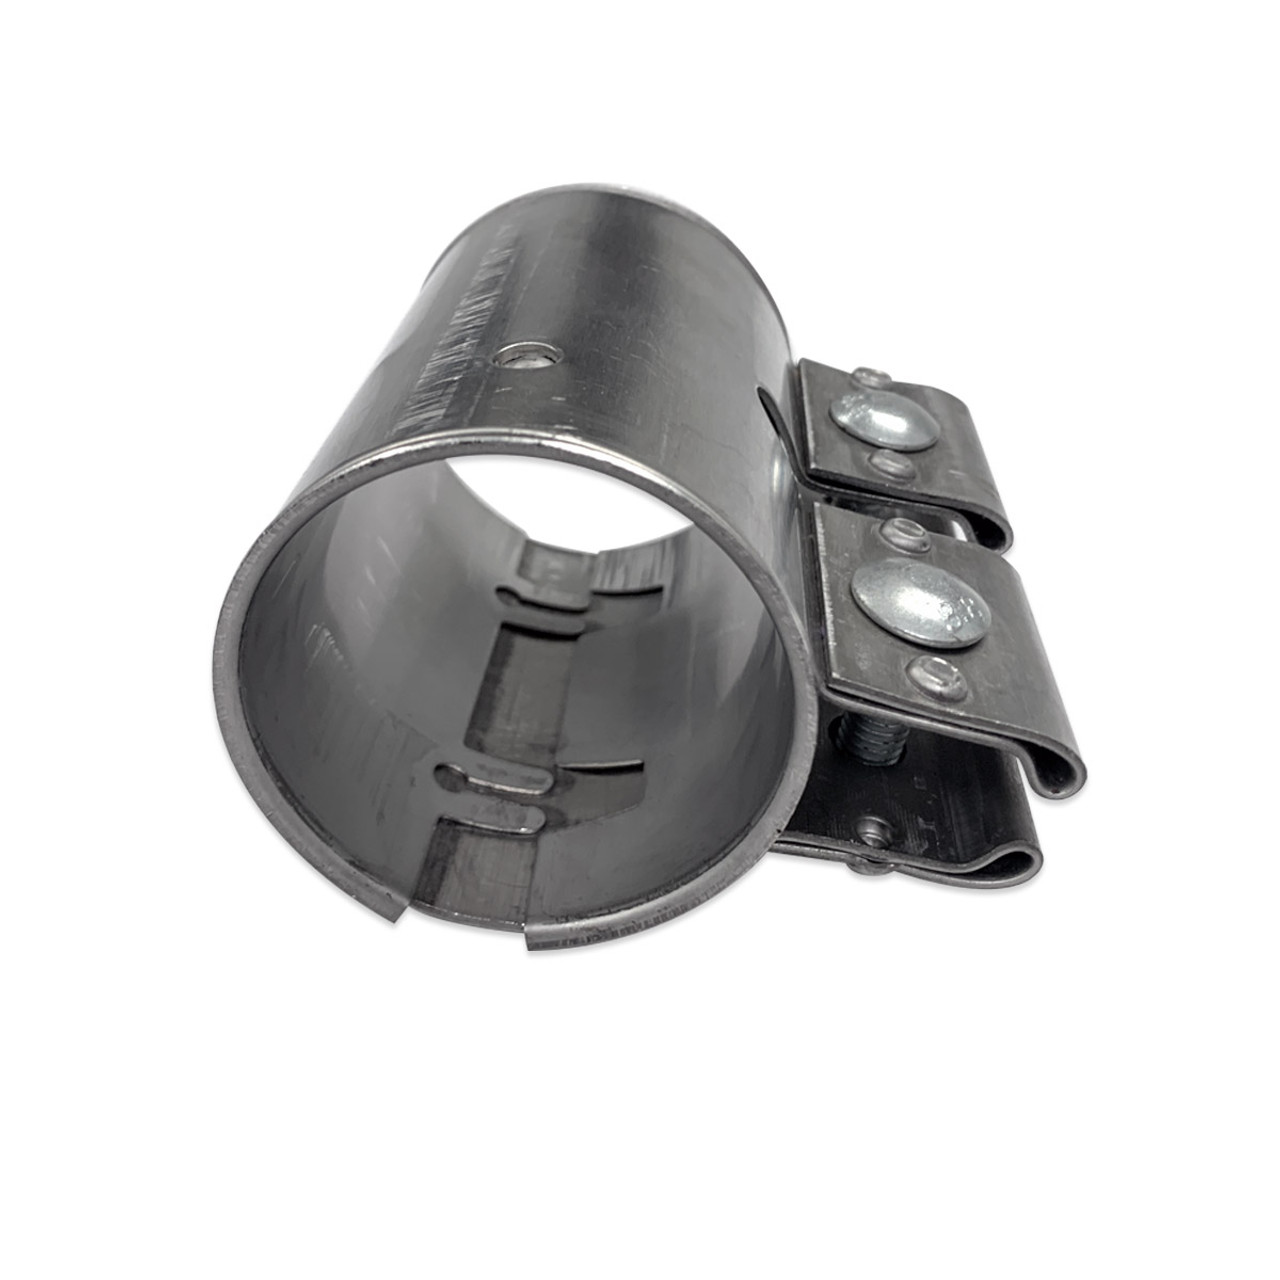 70mm Exhaust Clamp for Audi 8V A3/S3, 8S TTS, and VW MkVII Golf R